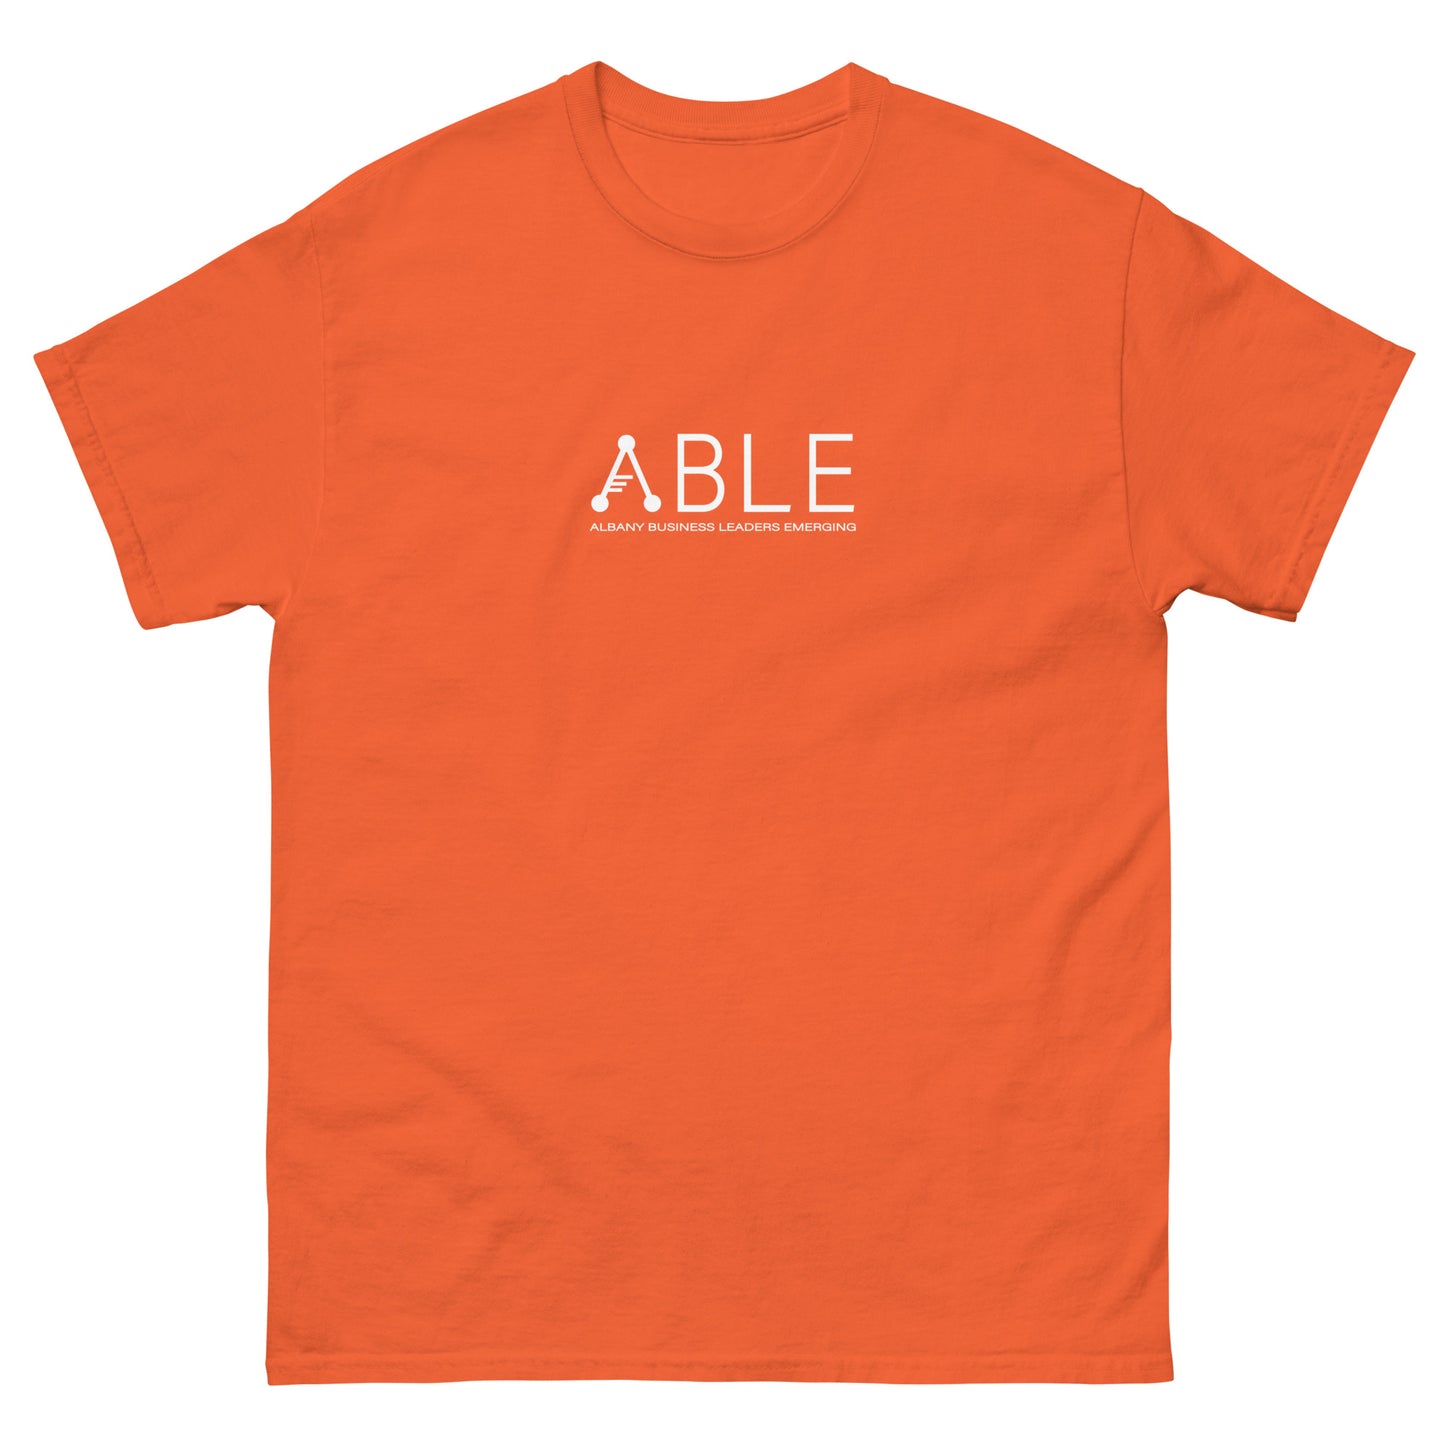 ABLE's Classic Tee